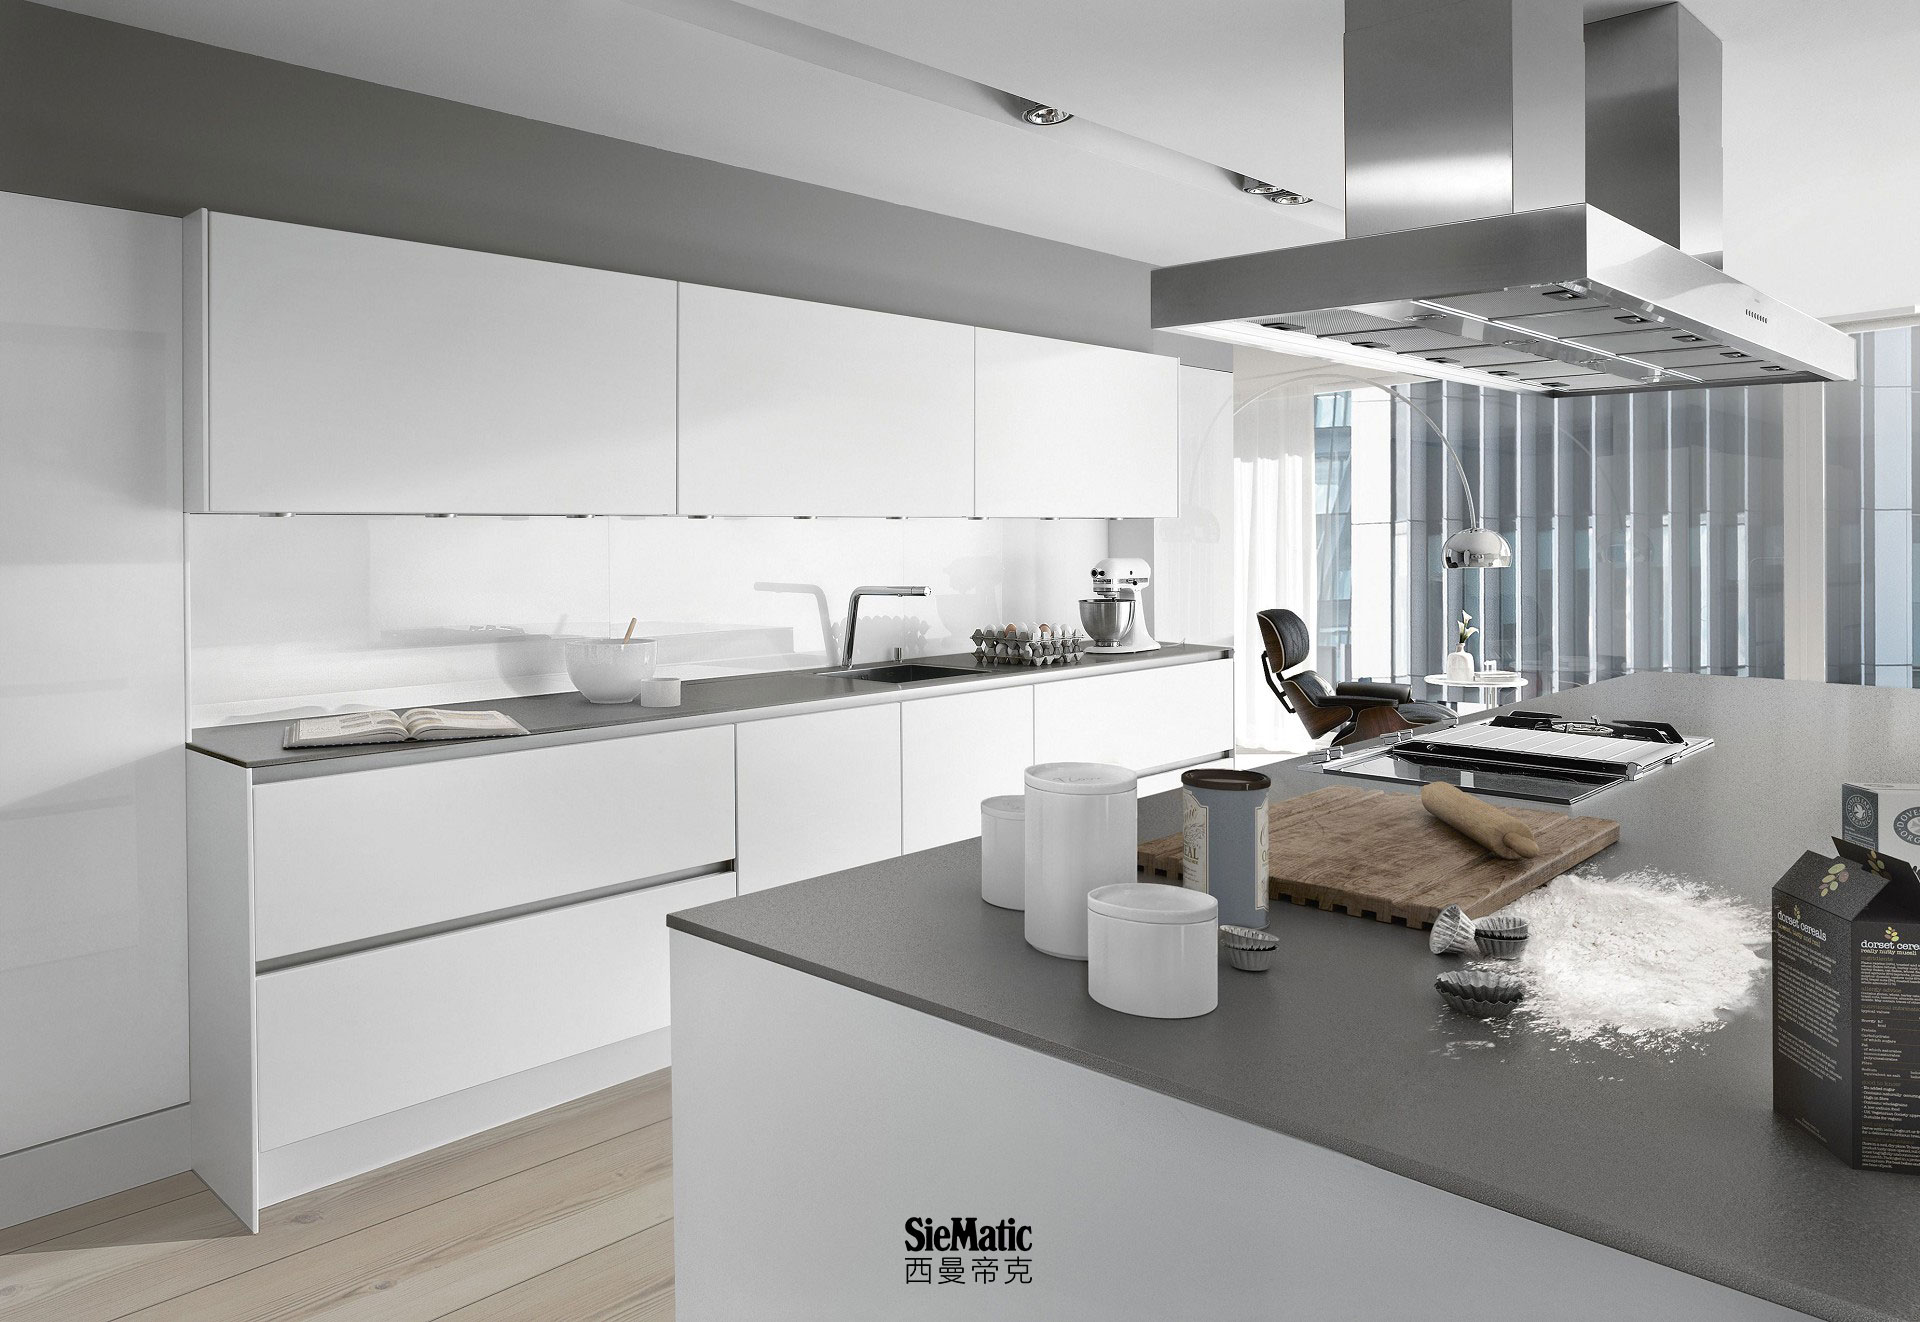 SieMatic S2 in lotus white from the Pure style collection with StoneDesign countertop appearing 1 cm thick and glass backsplash